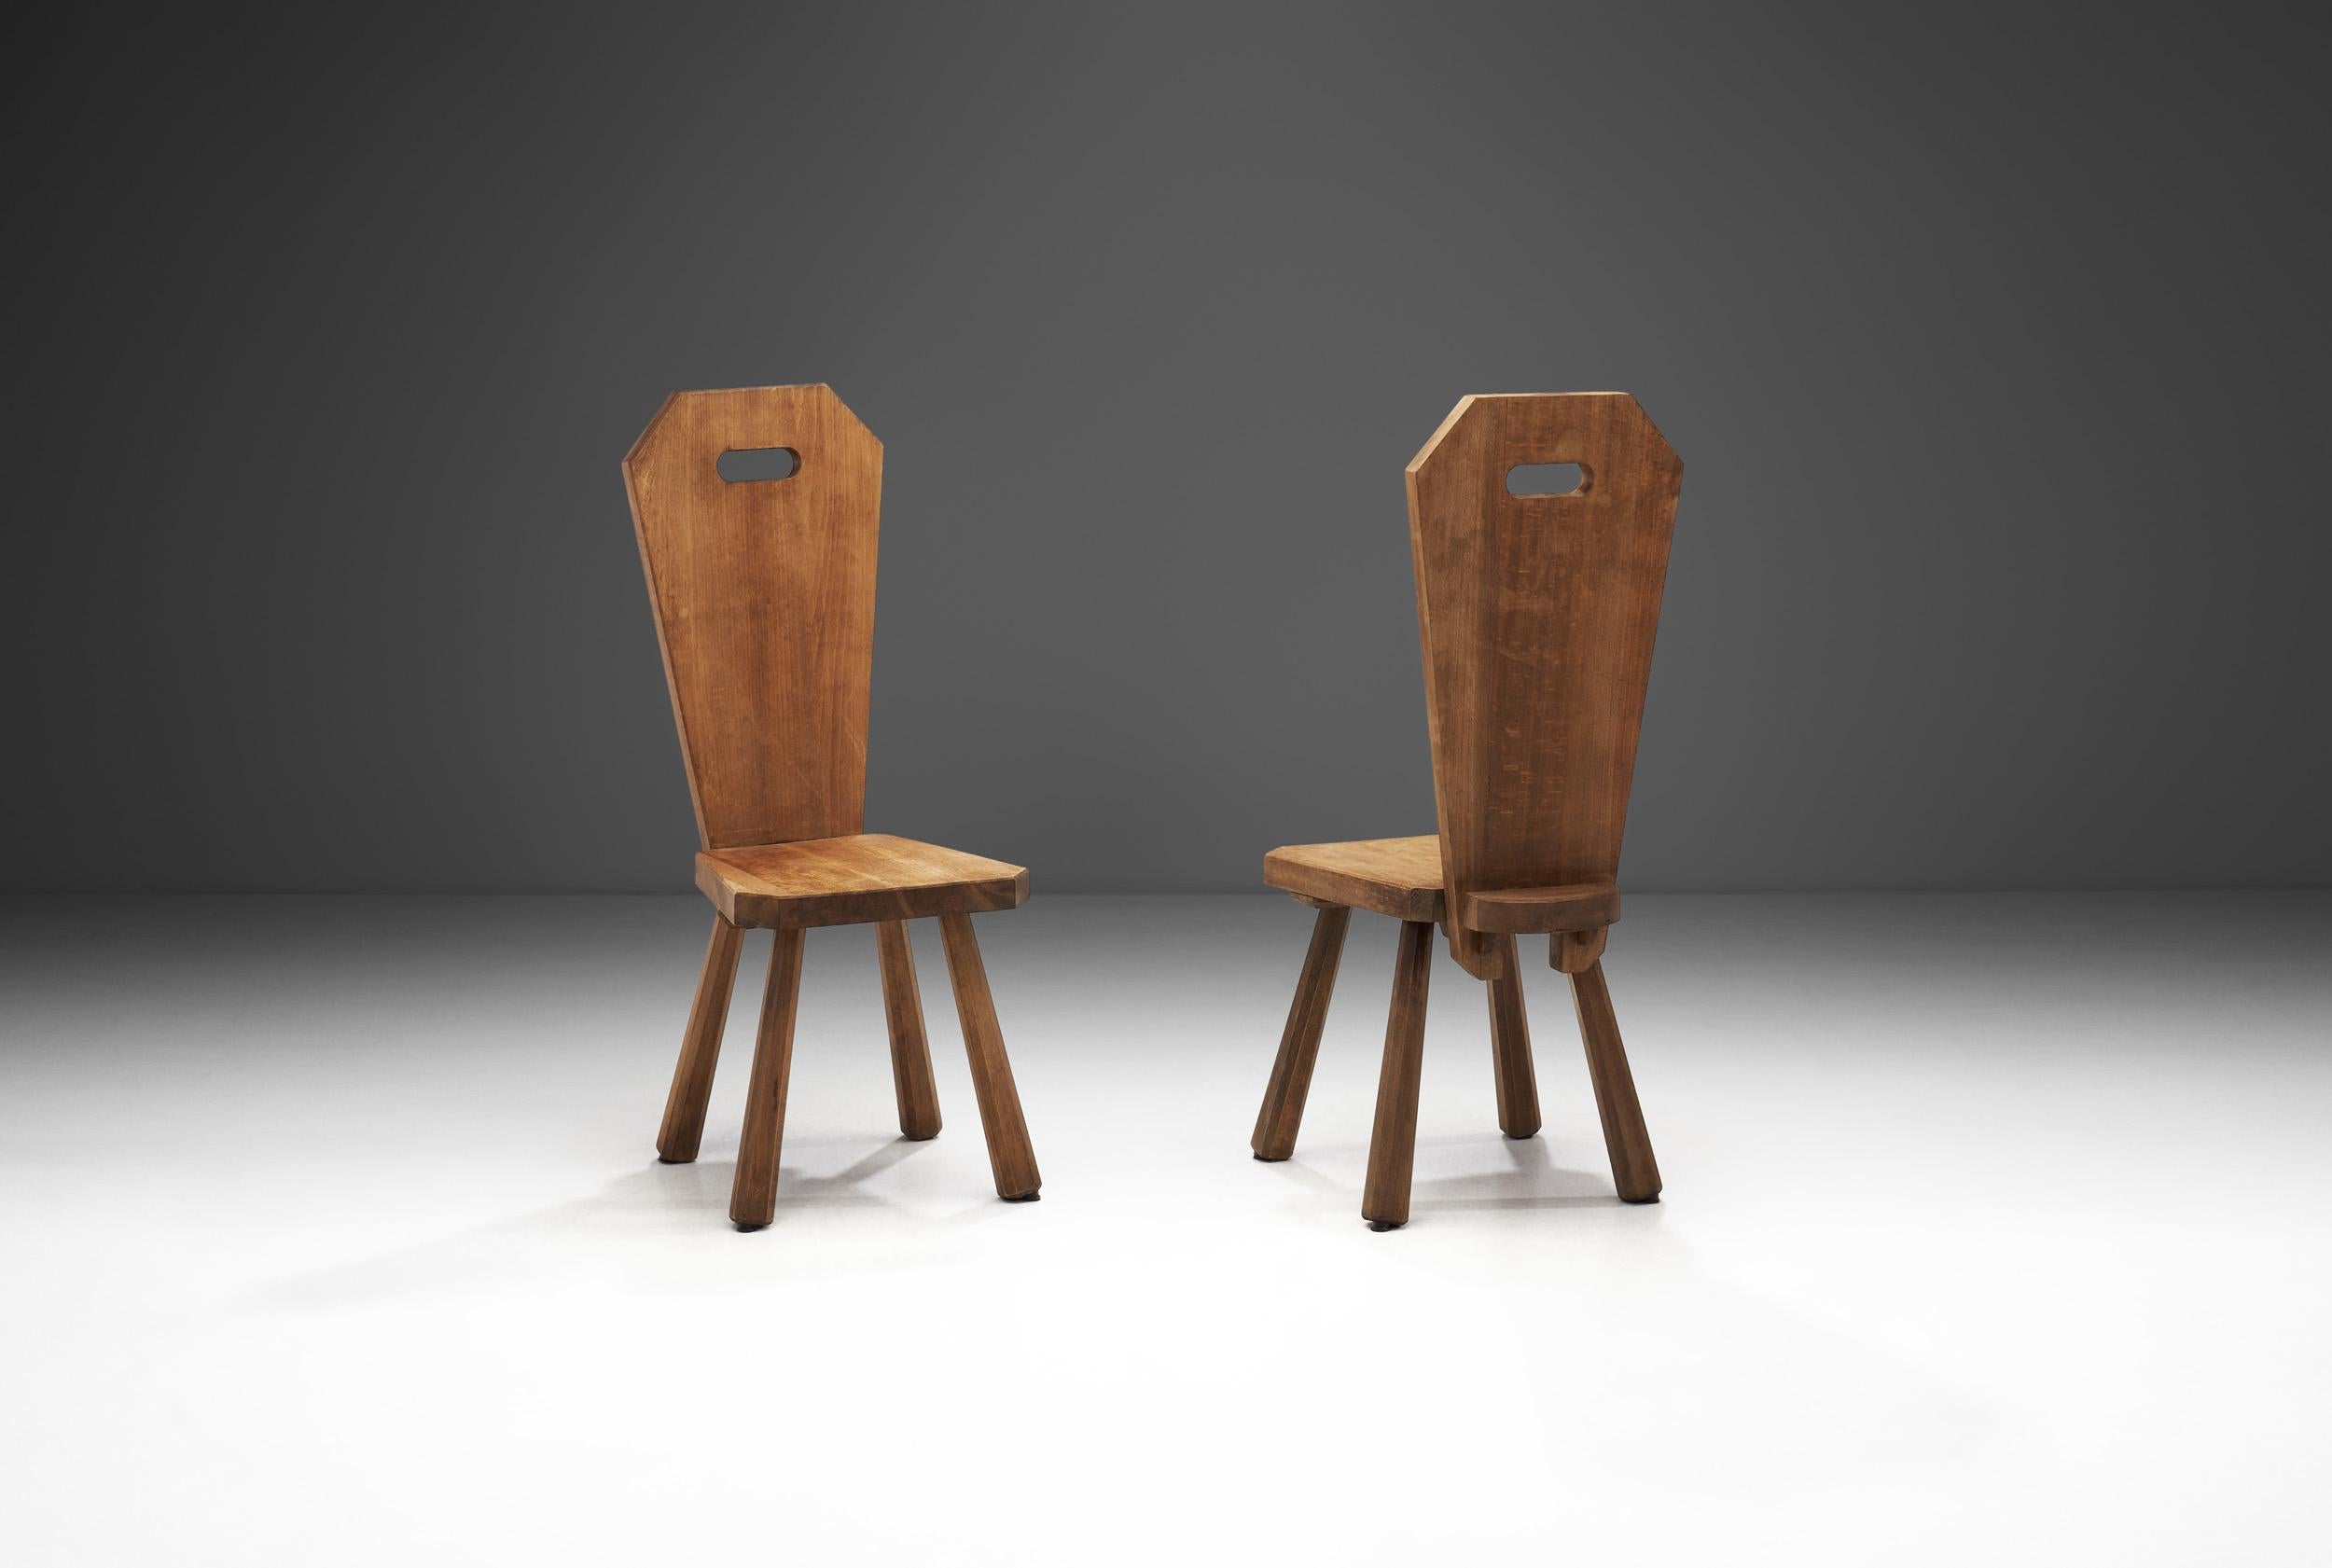 With a robust organic form and an earth-toned palette, this pair of chairs is the embodiment of Brutalism. In furniture and décor, the Brutalist movement was somber, giving importance to eerie organic and rugged shapes in organic, earthy